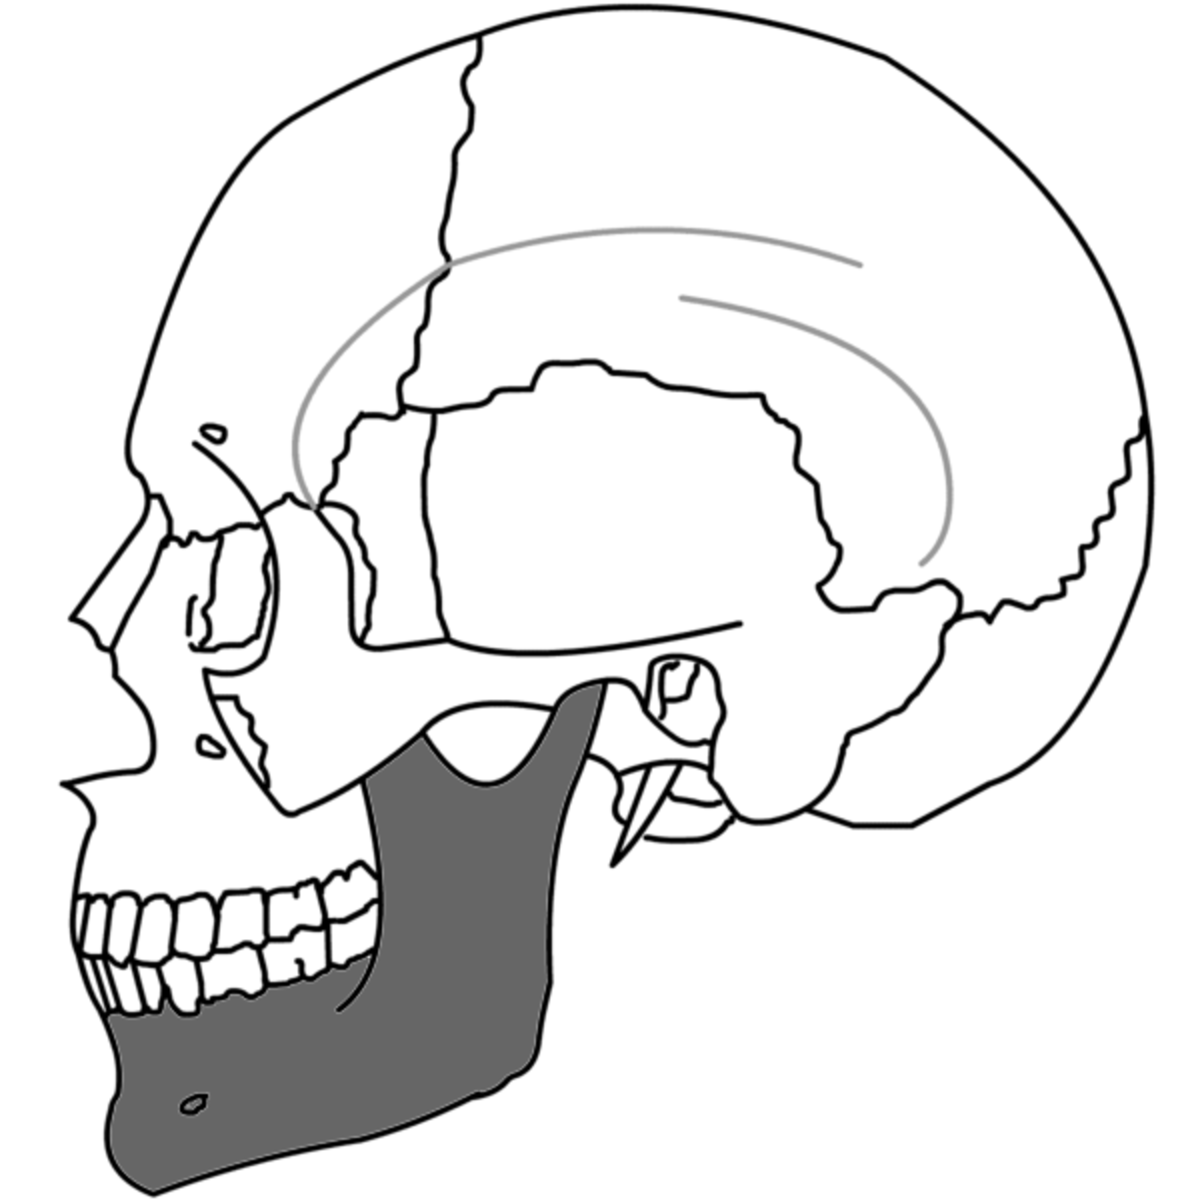 Here is a medical illustration of a skull with a mandible.